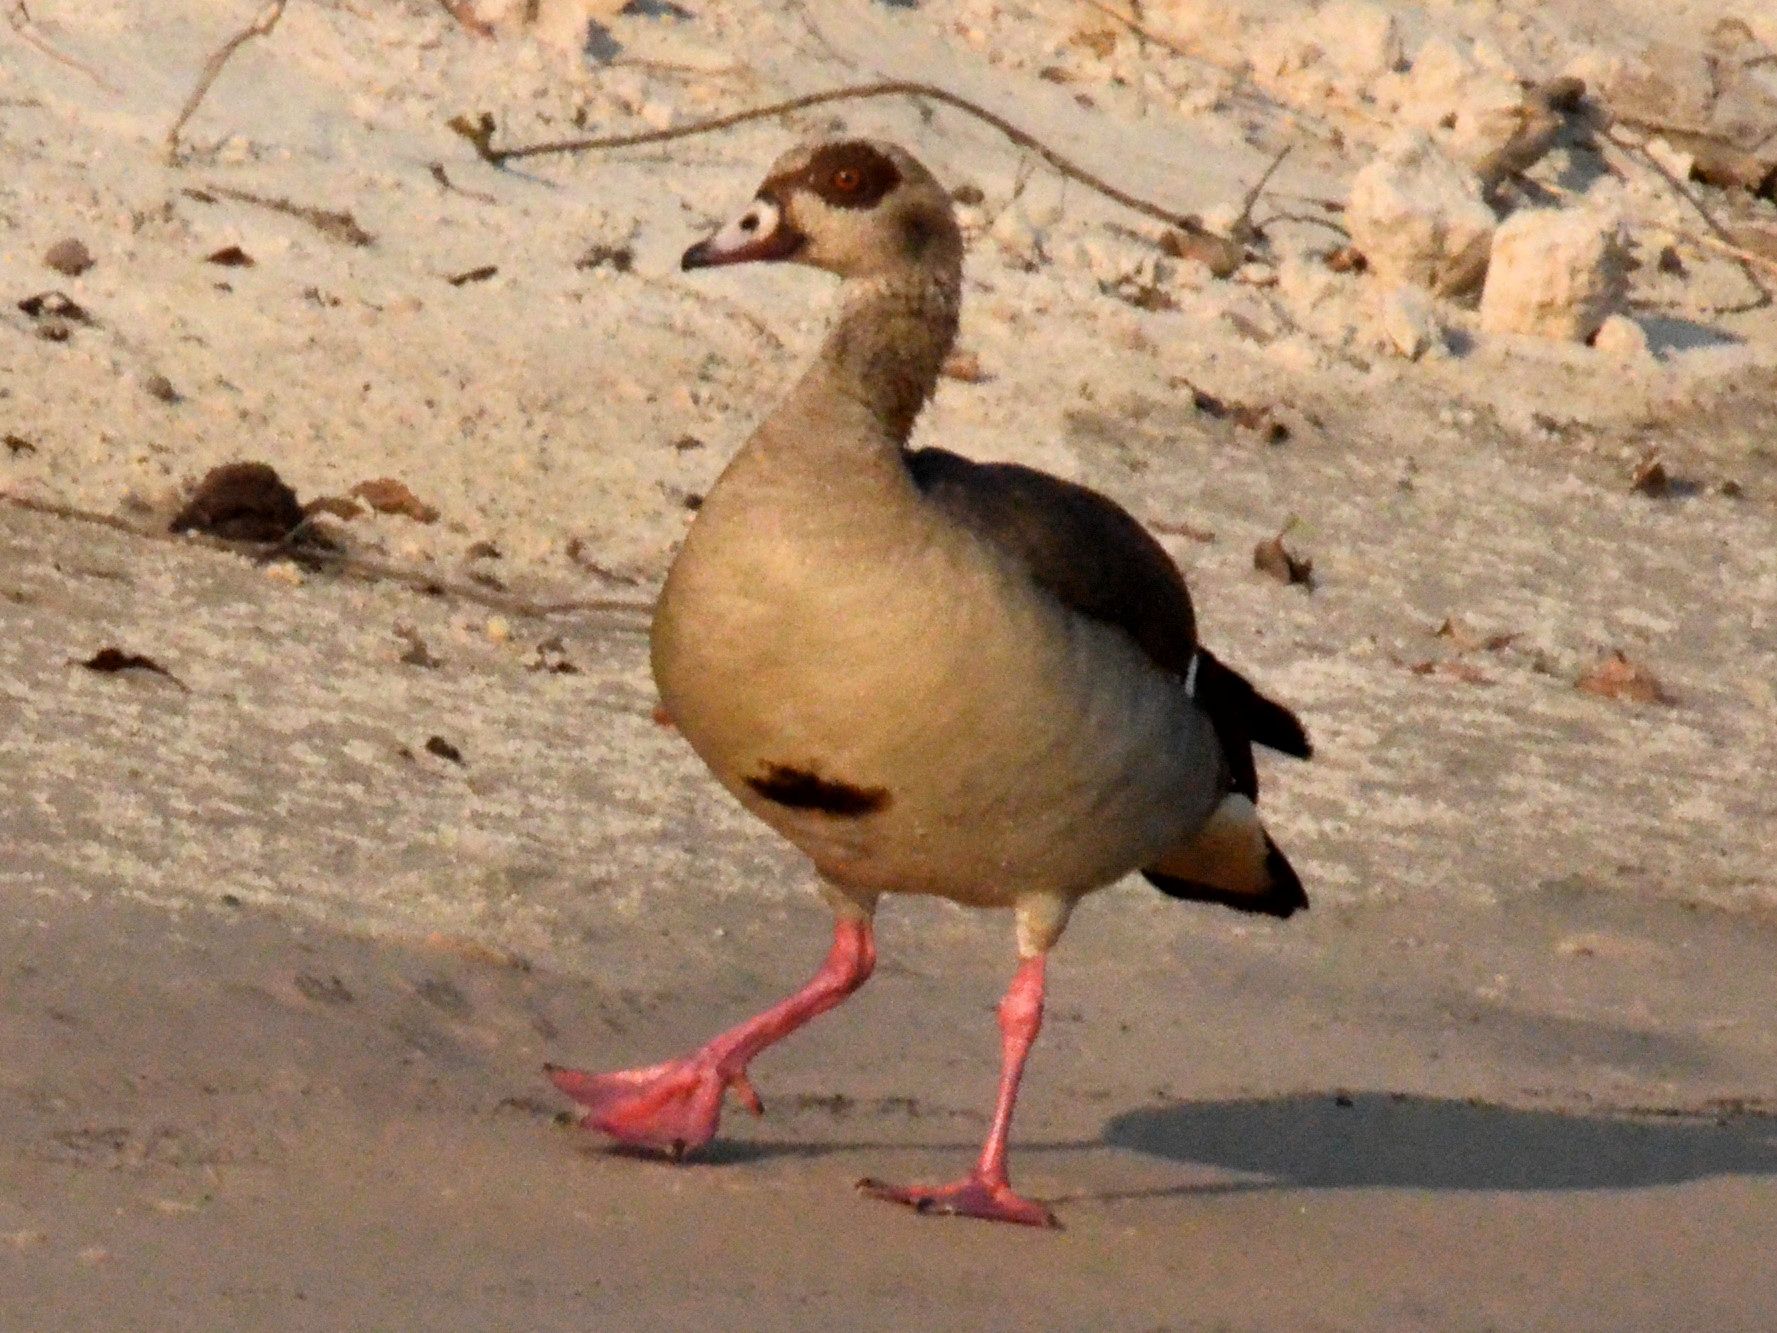 Click picture to see more Egyptian Gooses.